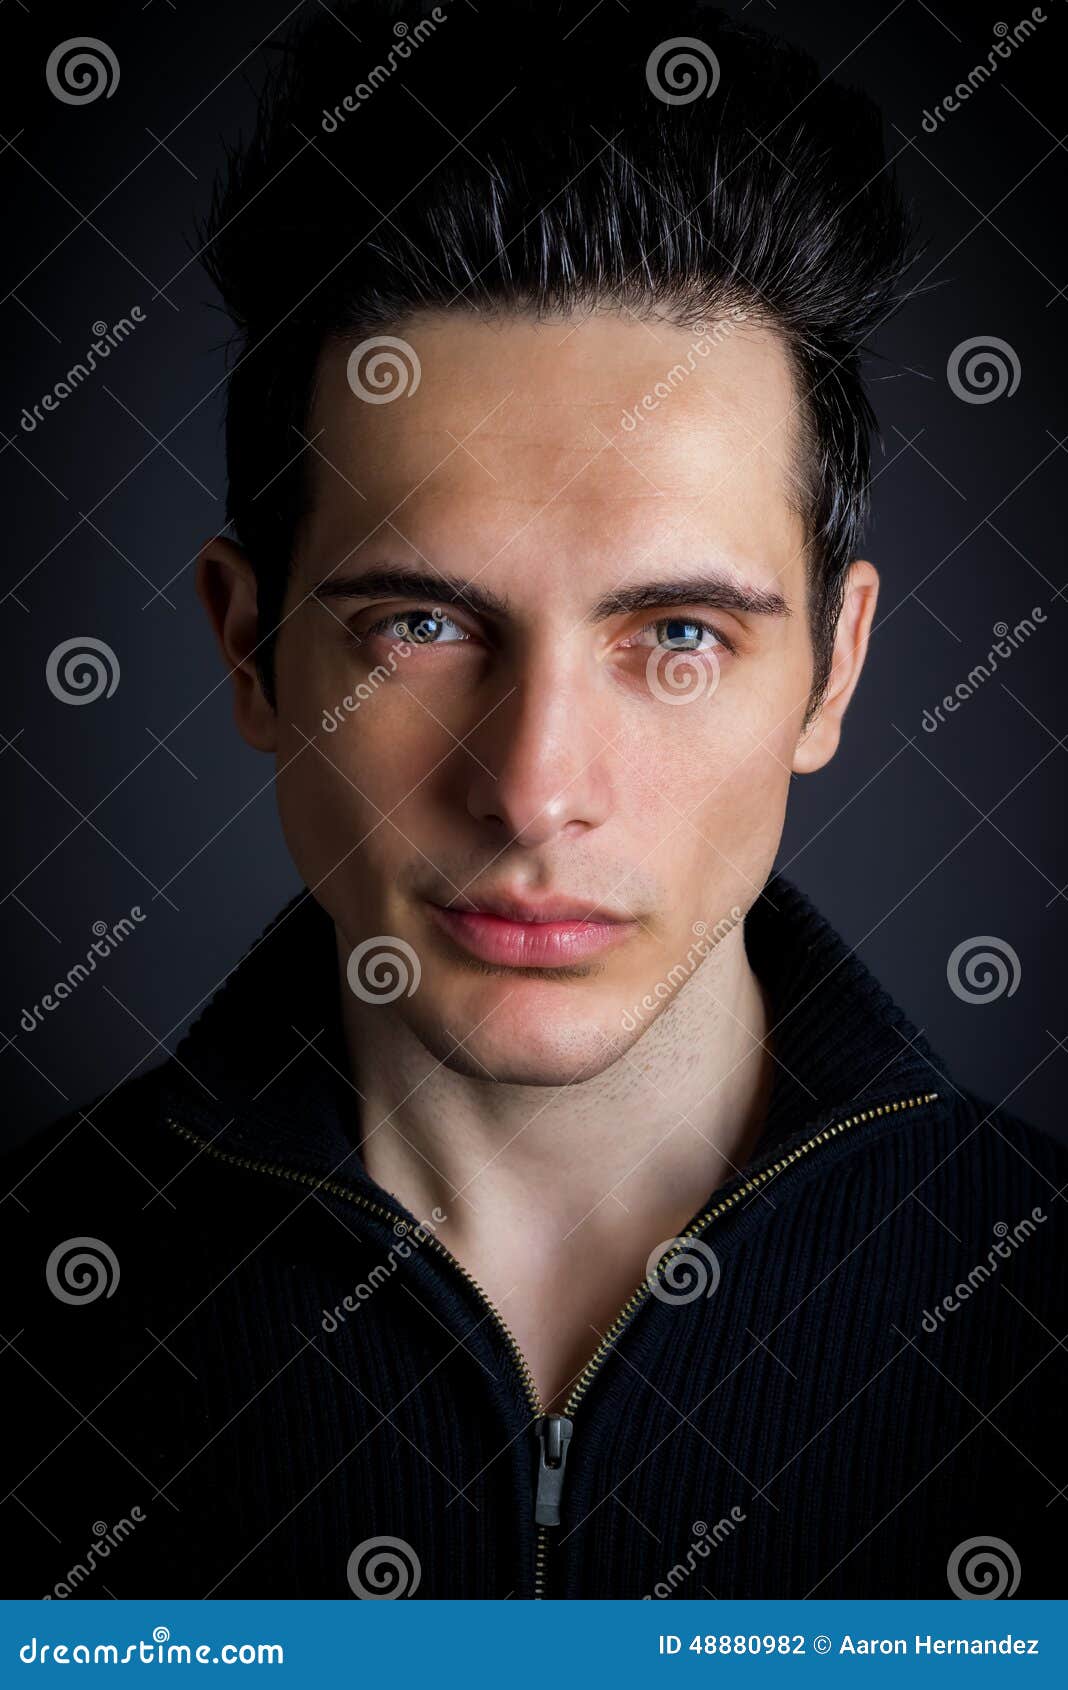 Attractive Male Looking into Camera Stock Photo - Image of emotions ...